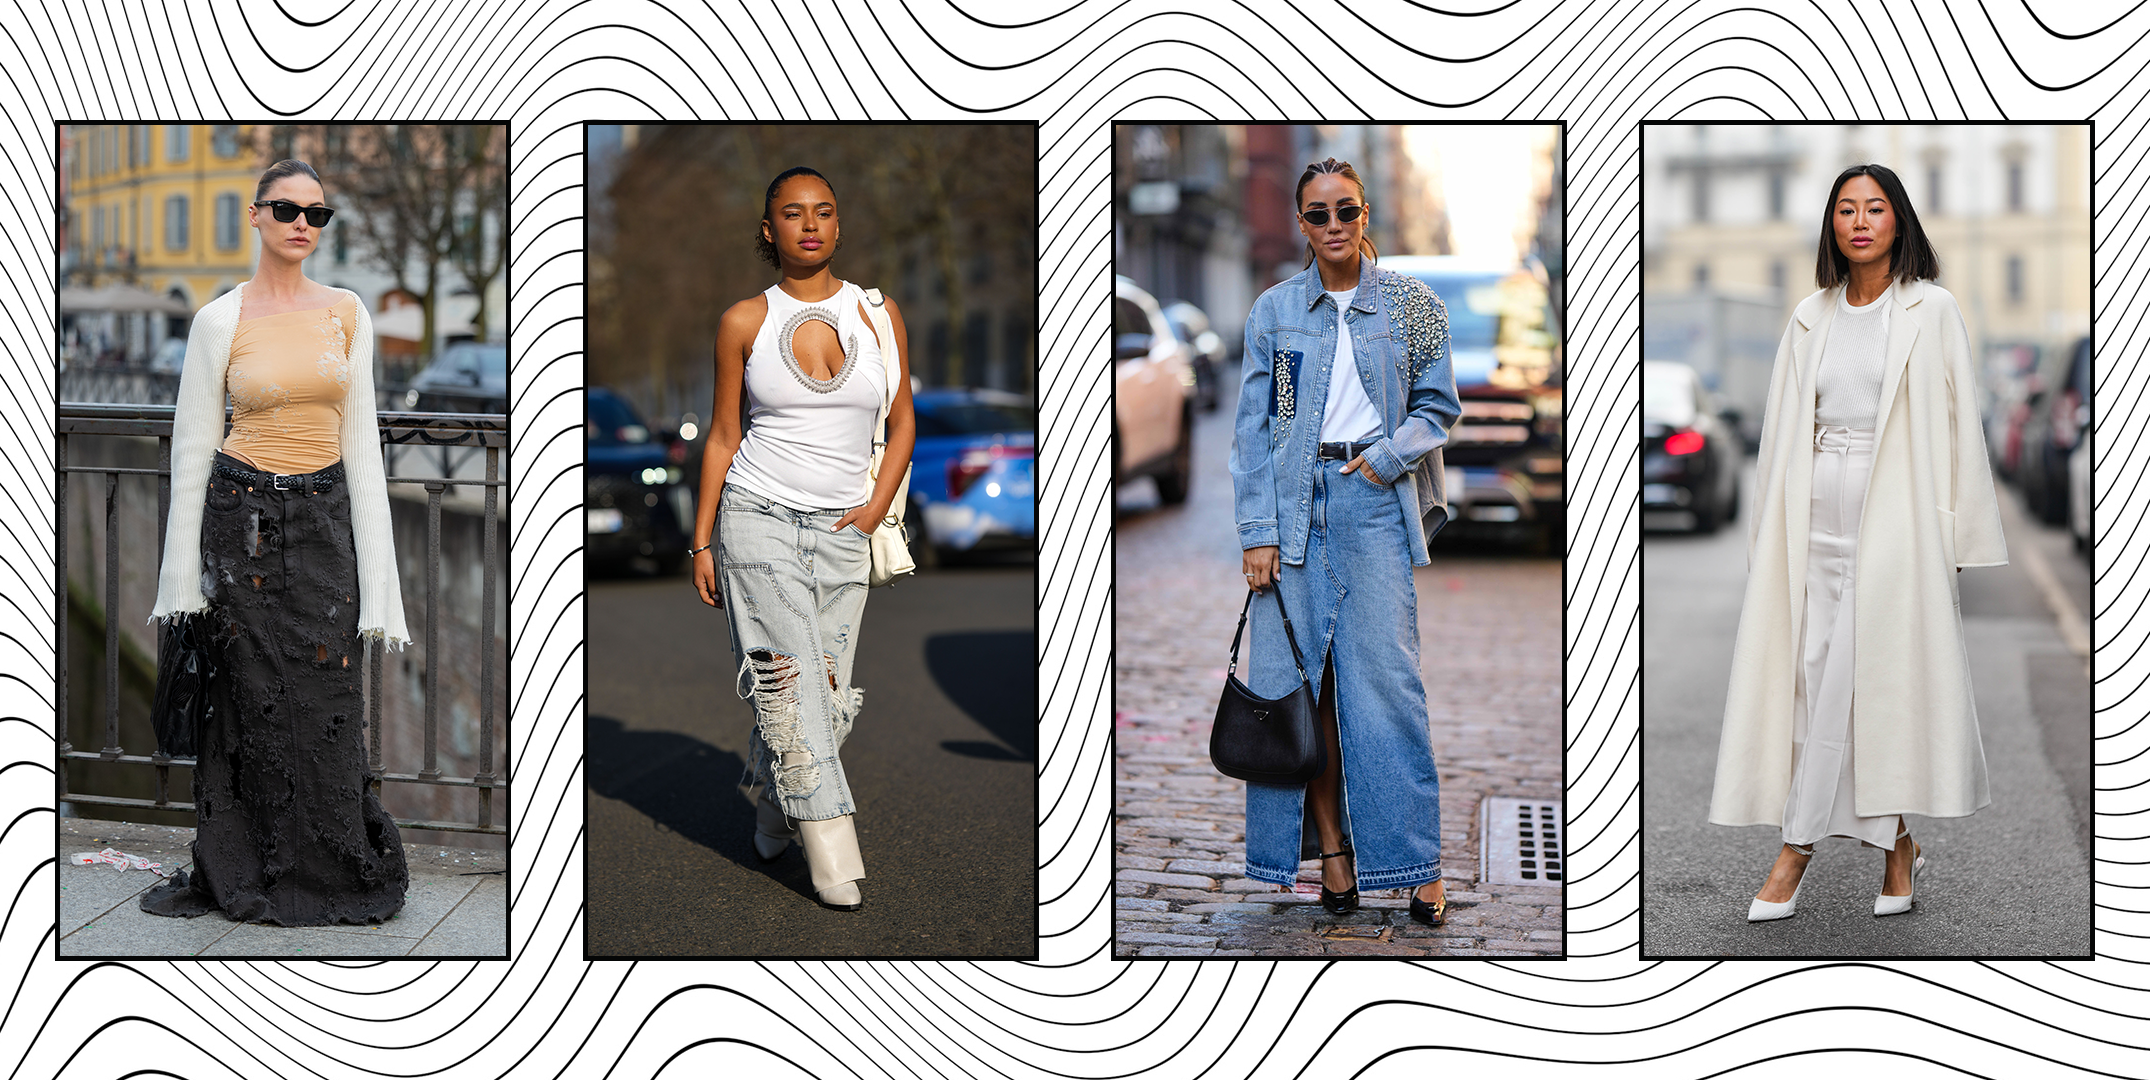 27 of the best denim maxi skirts to shop now and wear all year long